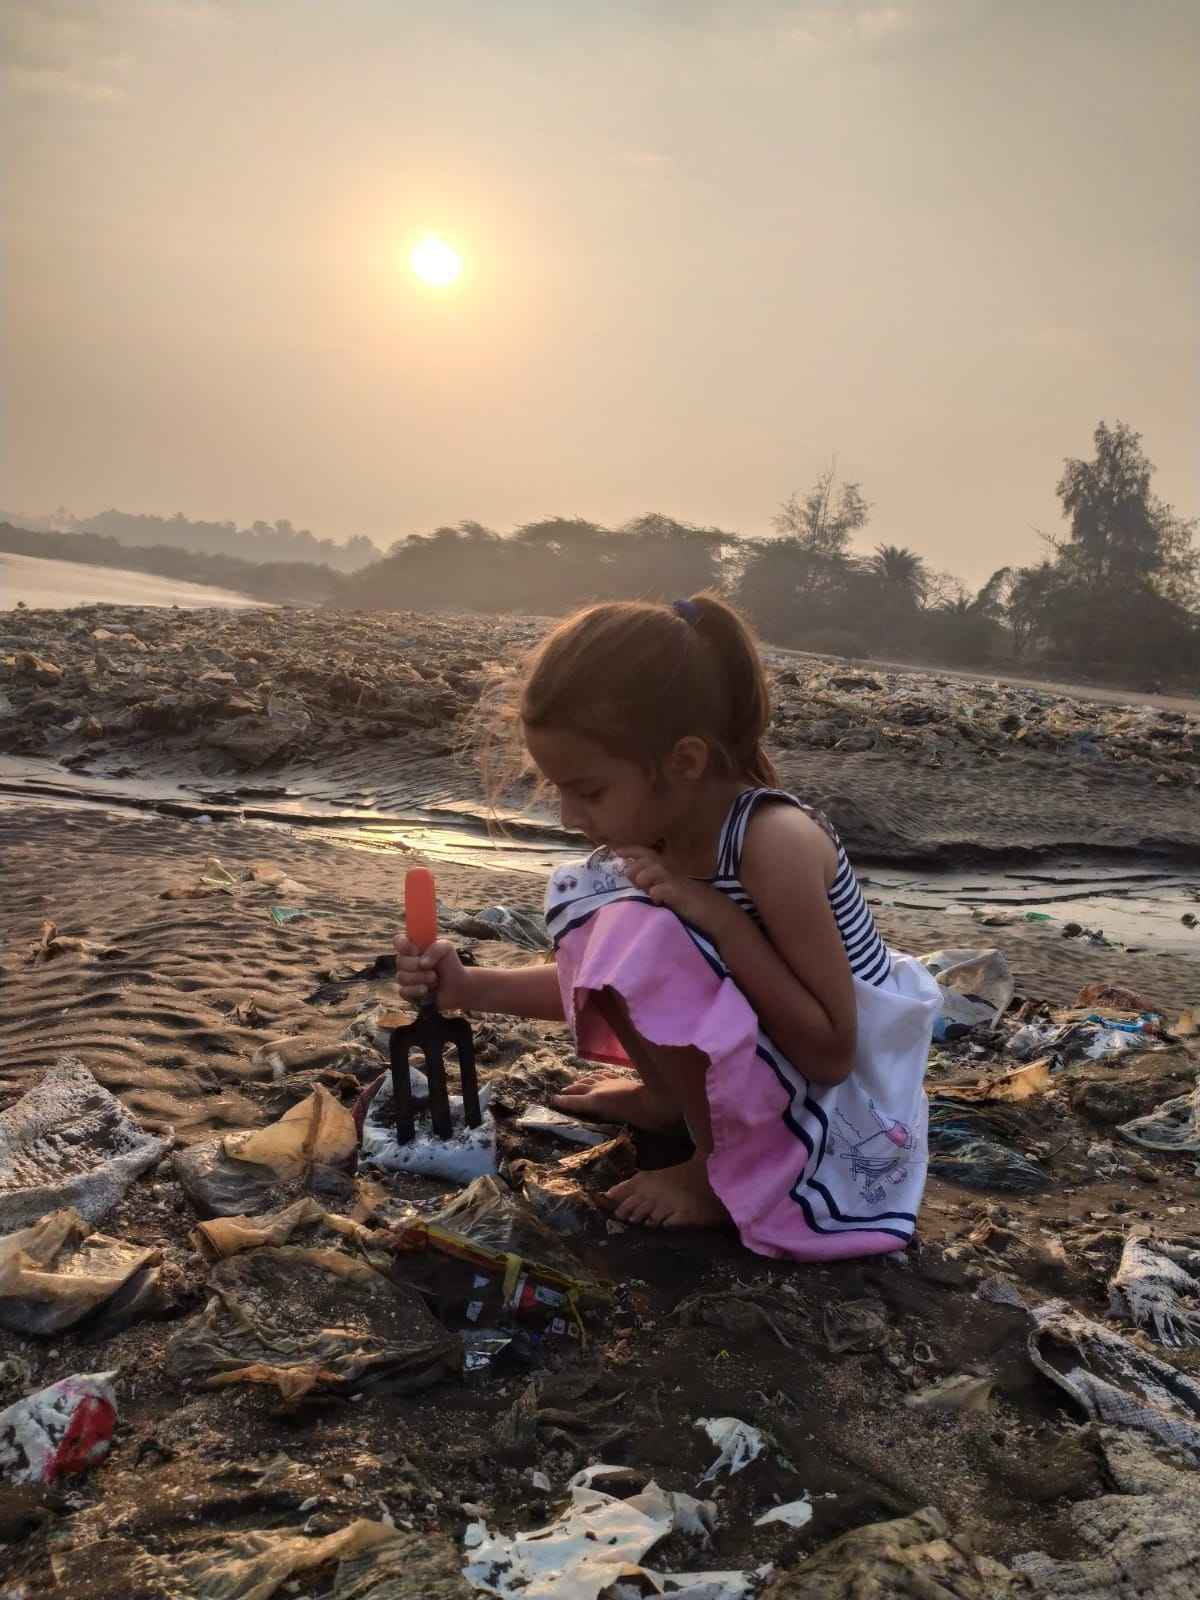 Even children join in to clean the beaches